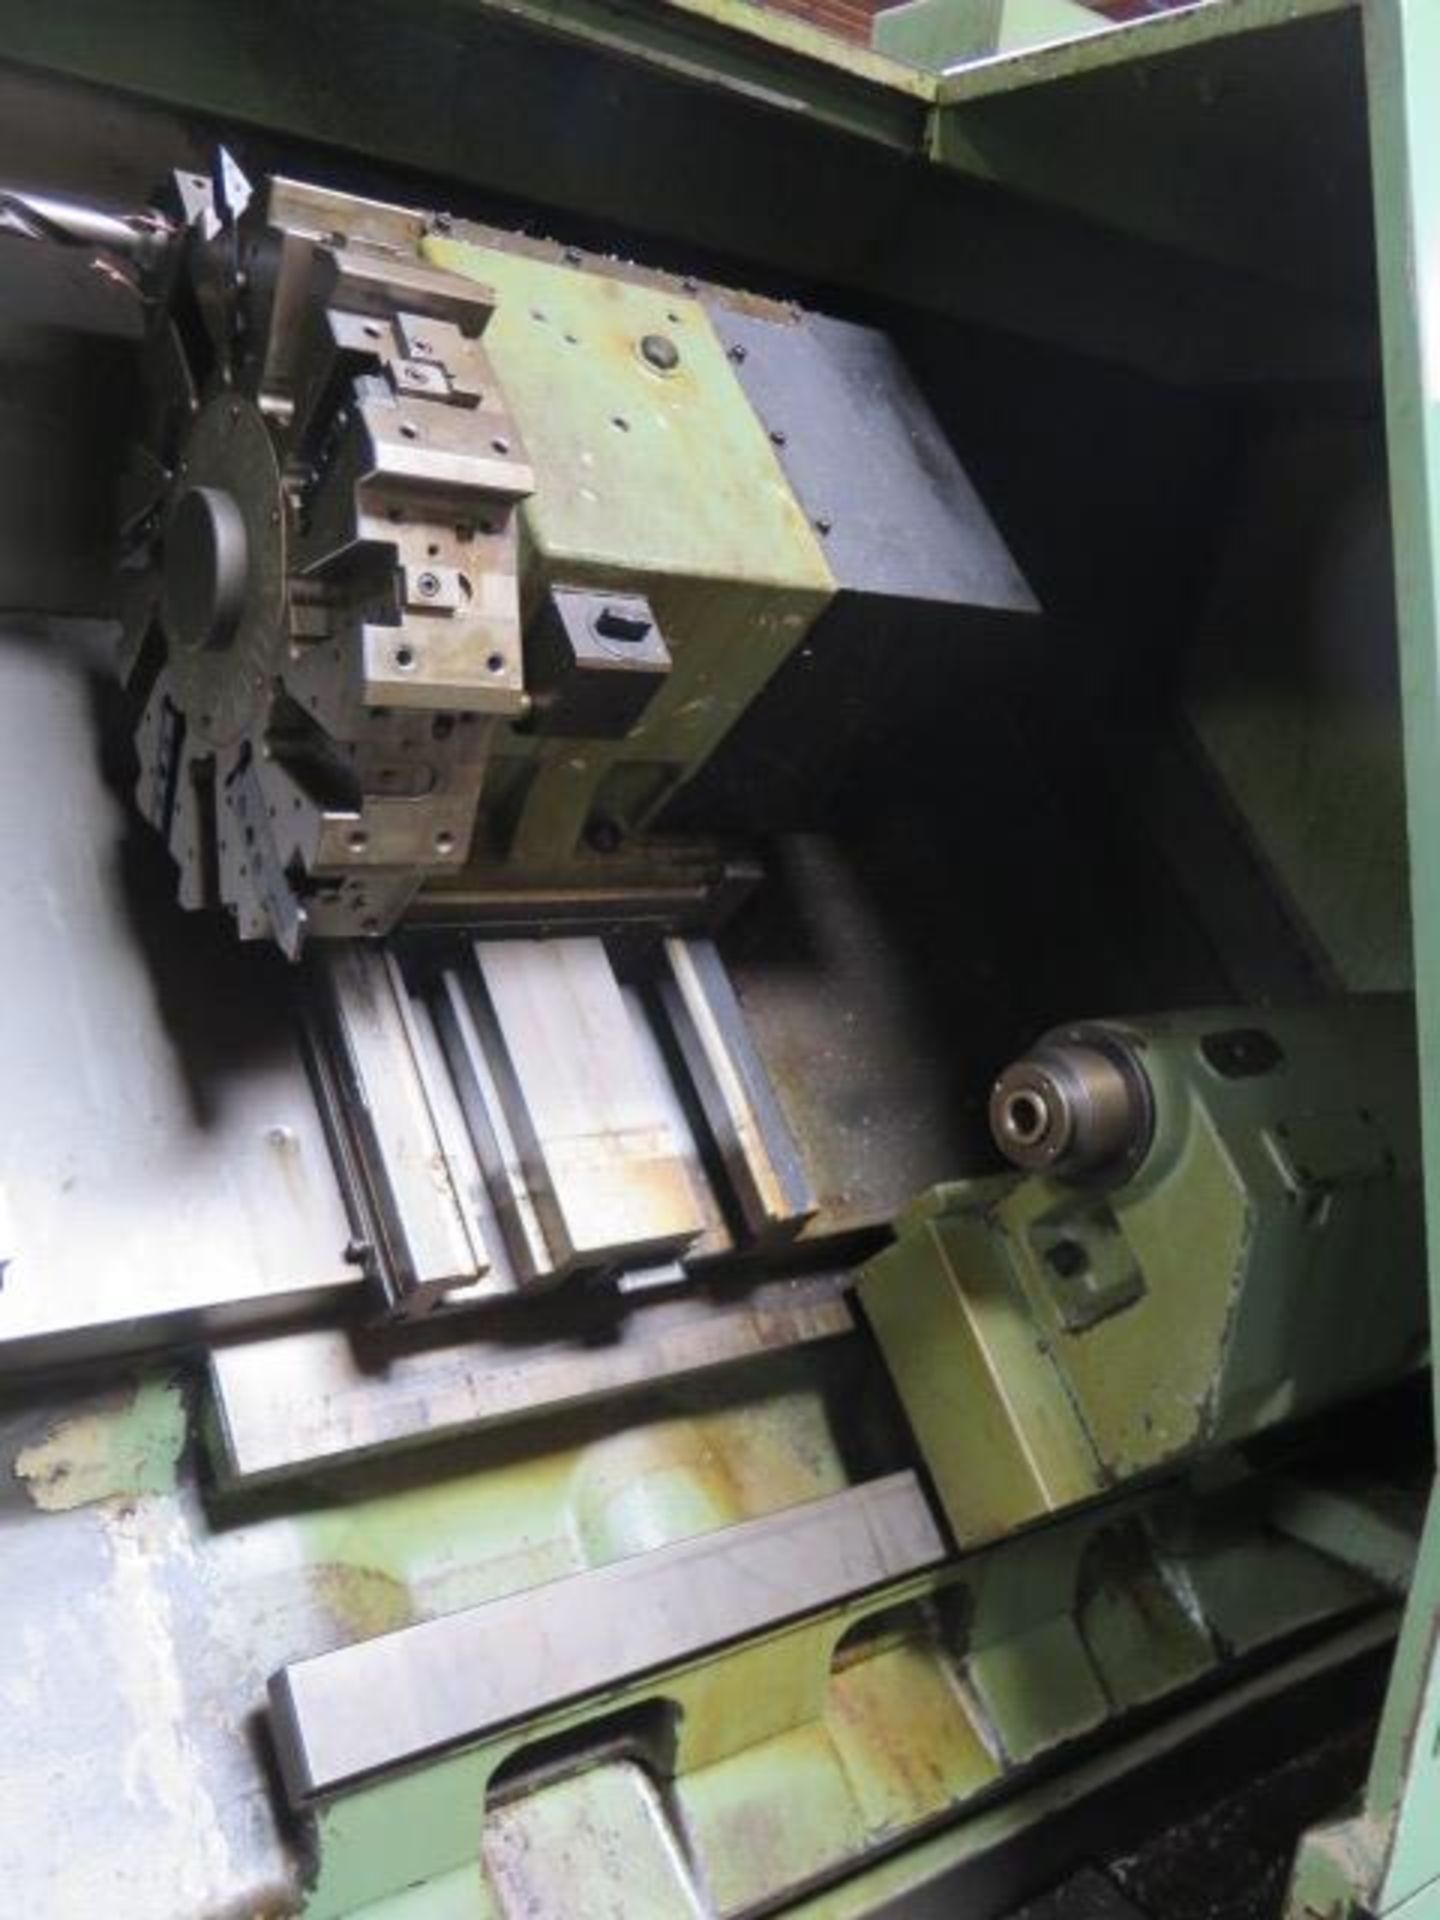 Mori Seiki SL-35A CNC Turning Center s/n 423 w/ Fanuc 10T Controls, 12-Station Turret, SOLD AS IS - Image 6 of 13